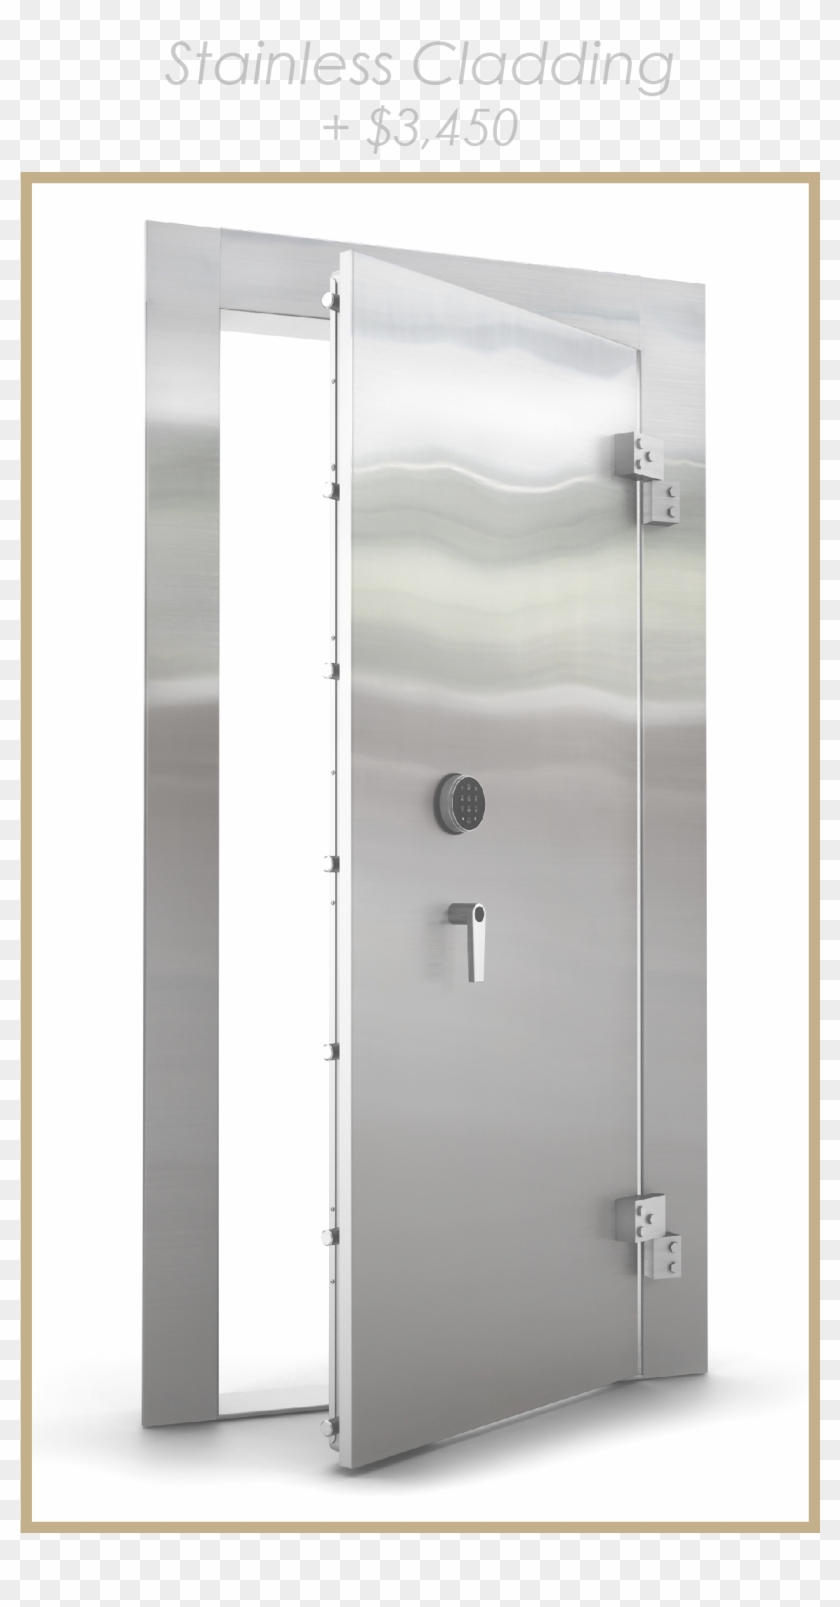 Stainless Cladding - Sliding Door Clipart #3958669